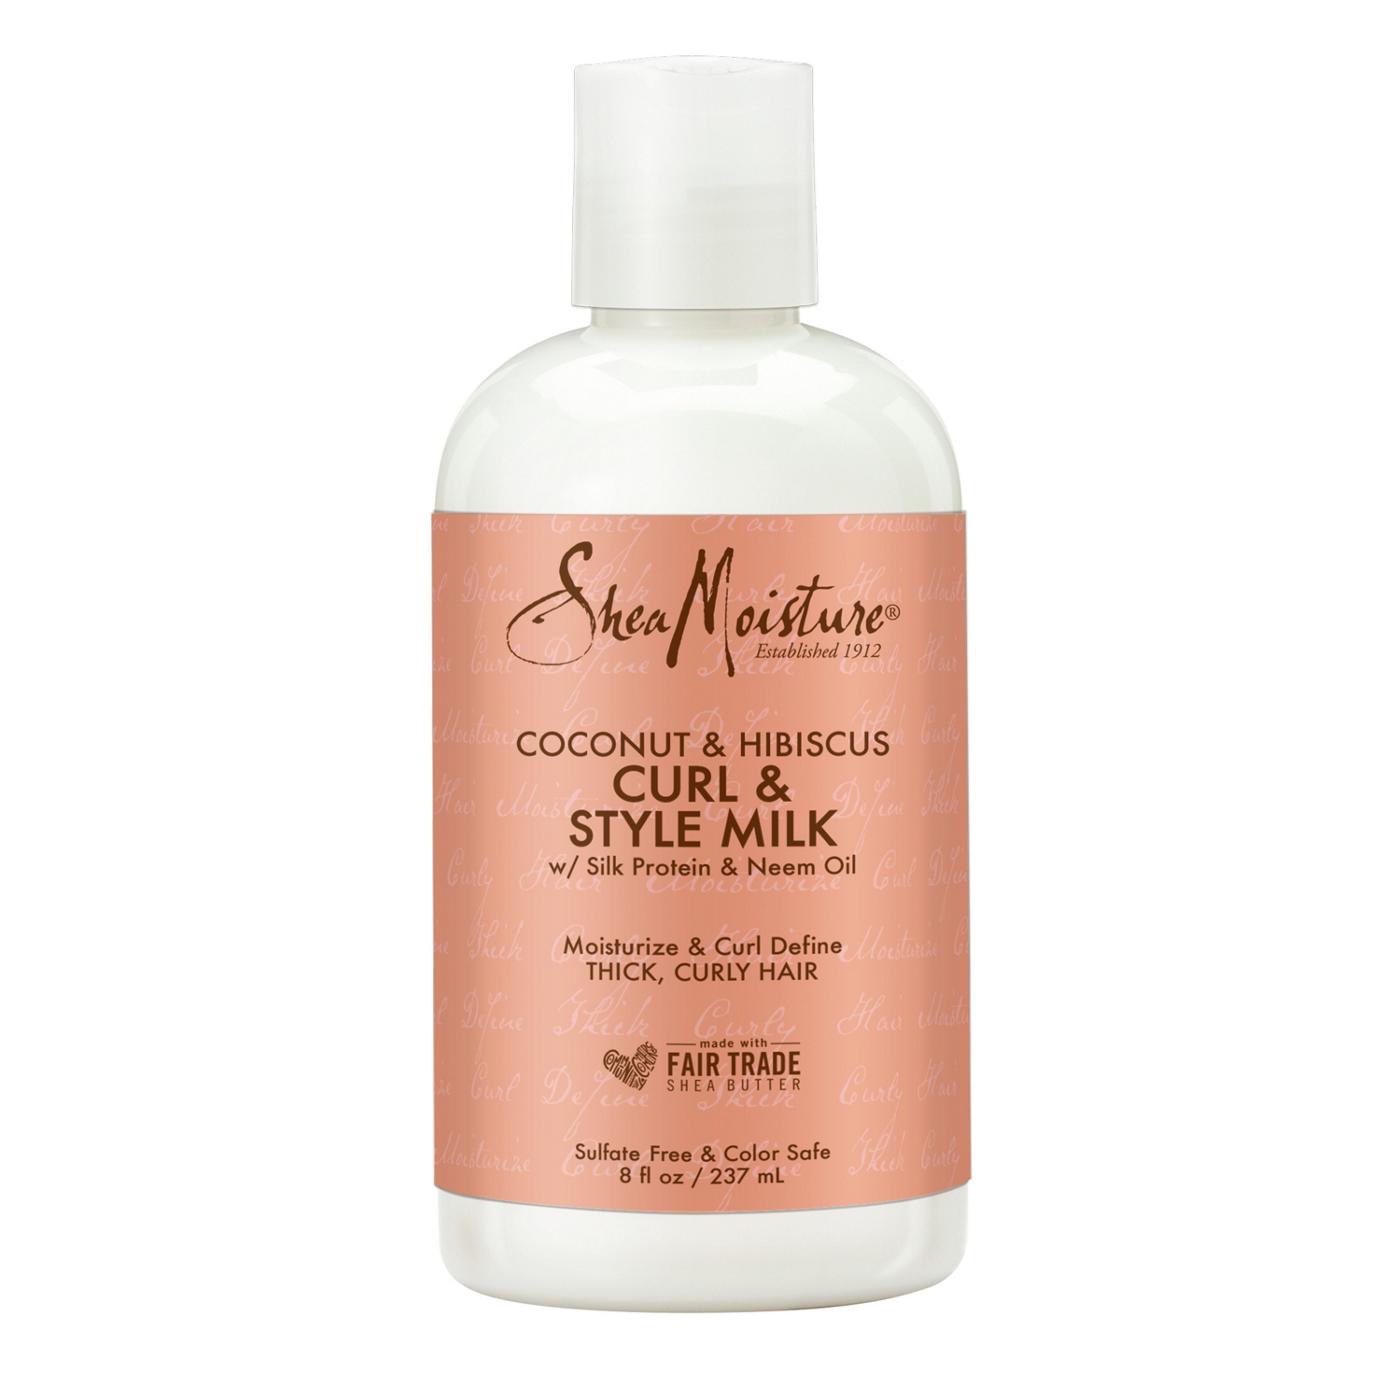 SheaMoisture Coconut & Hibiscus Curl & Style Milk; image 1 of 4